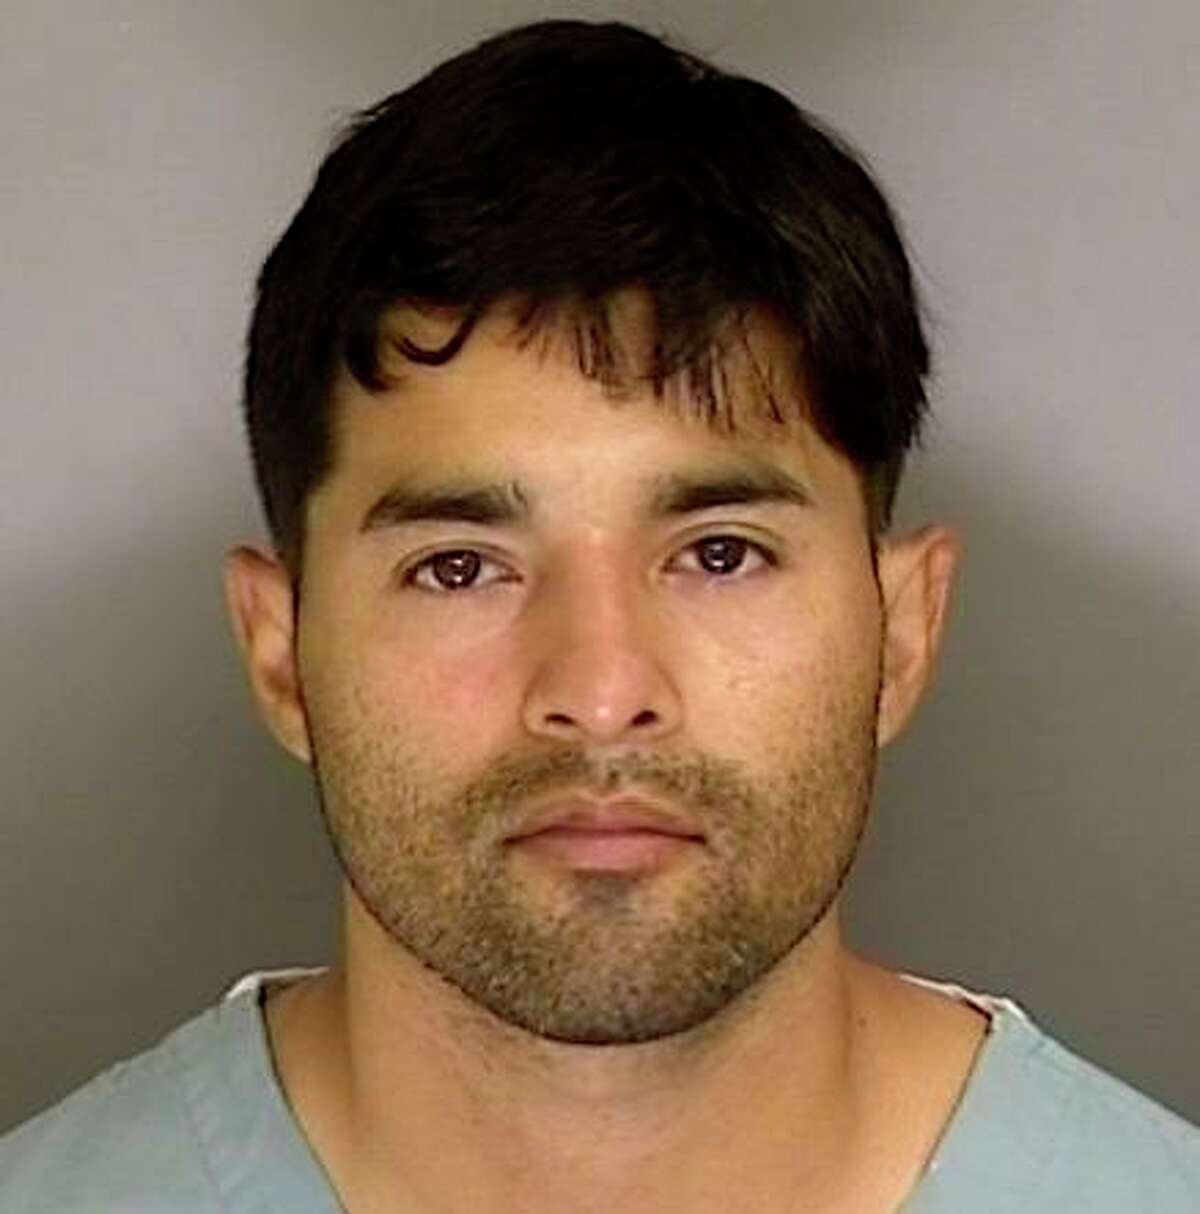 Steven Carrillo was a decorated Air Force veteran of 12 years with deployments across the Middle East before he met a group of antigovernment people online and joined a militia. Now, he has been convicted of one murder and is being tried in another, both of people in law enforcement.